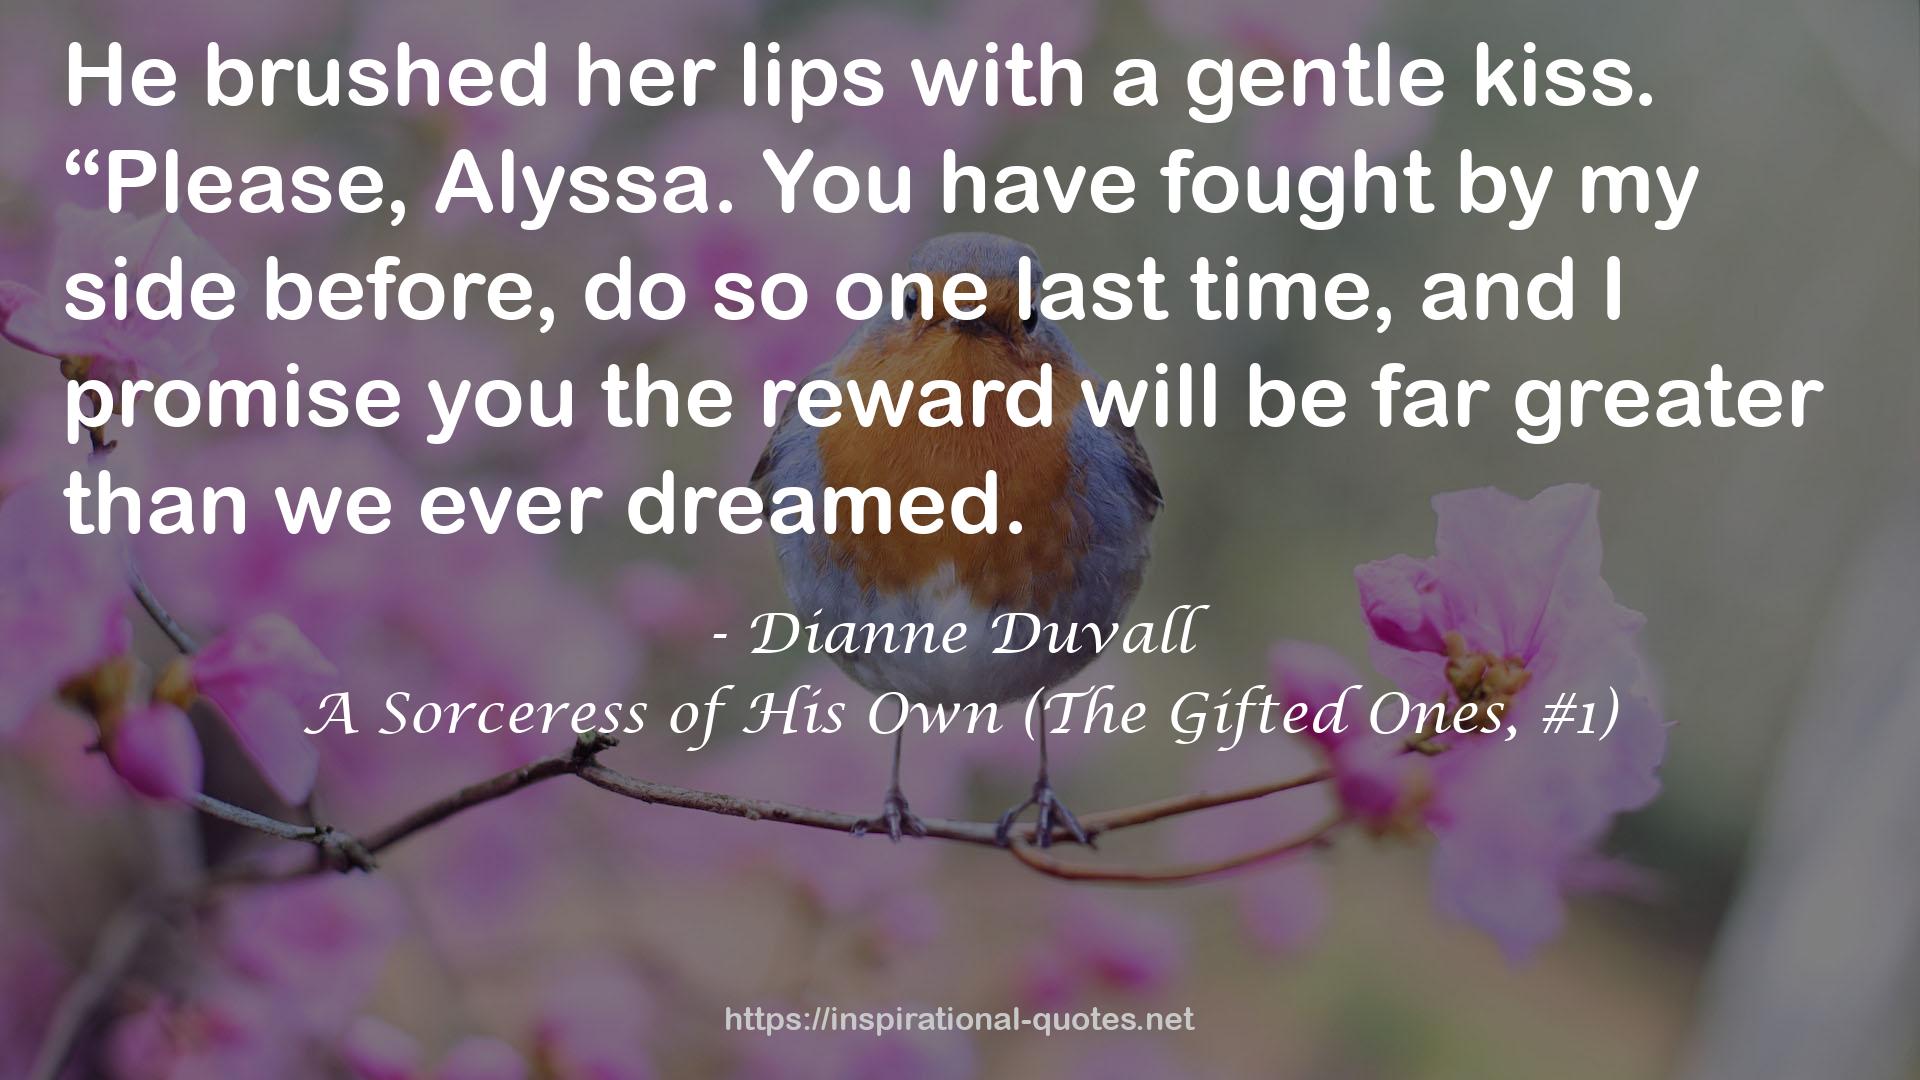 A Sorceress of His Own (The Gifted Ones, #1) QUOTES